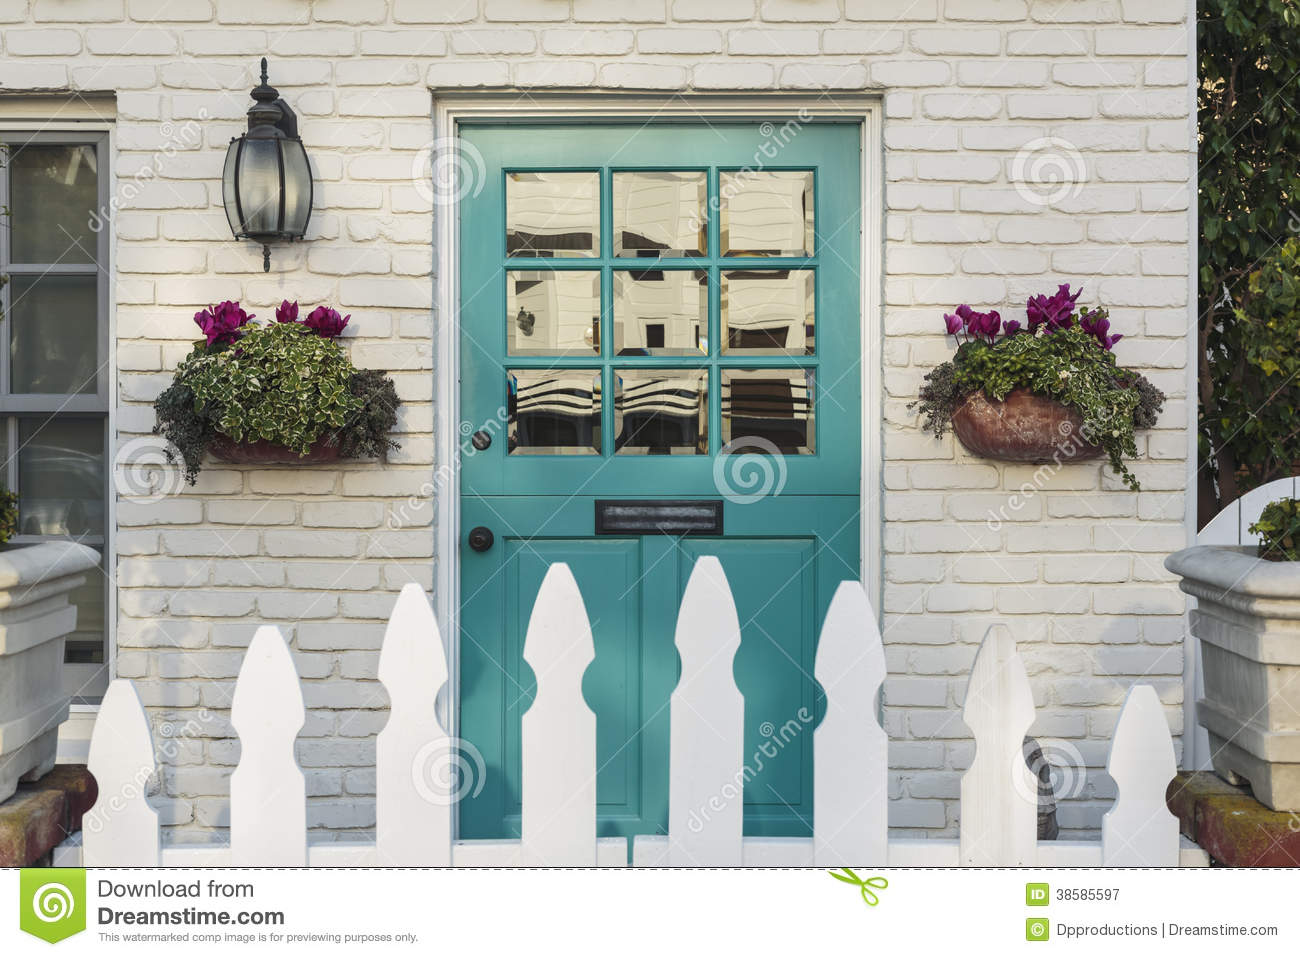 Teal Wooden Front Door To A Home With White Picket Fence Gate In